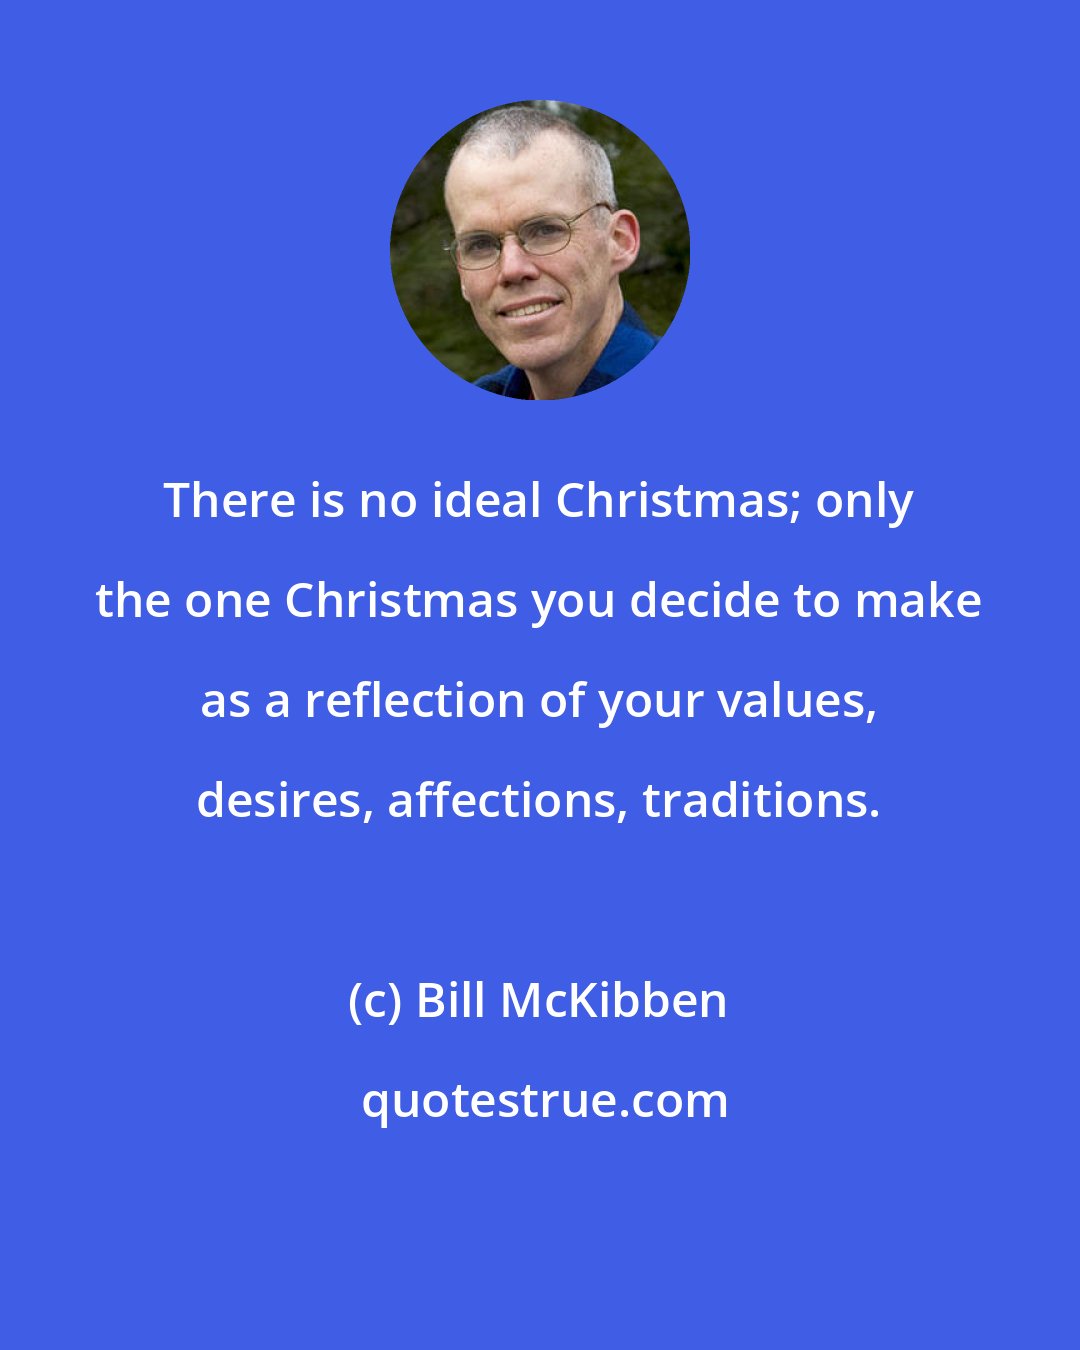 Bill McKibben: There is no ideal Christmas; only the one Christmas you decide to make as a reflection of your values, desires, affections, traditions.